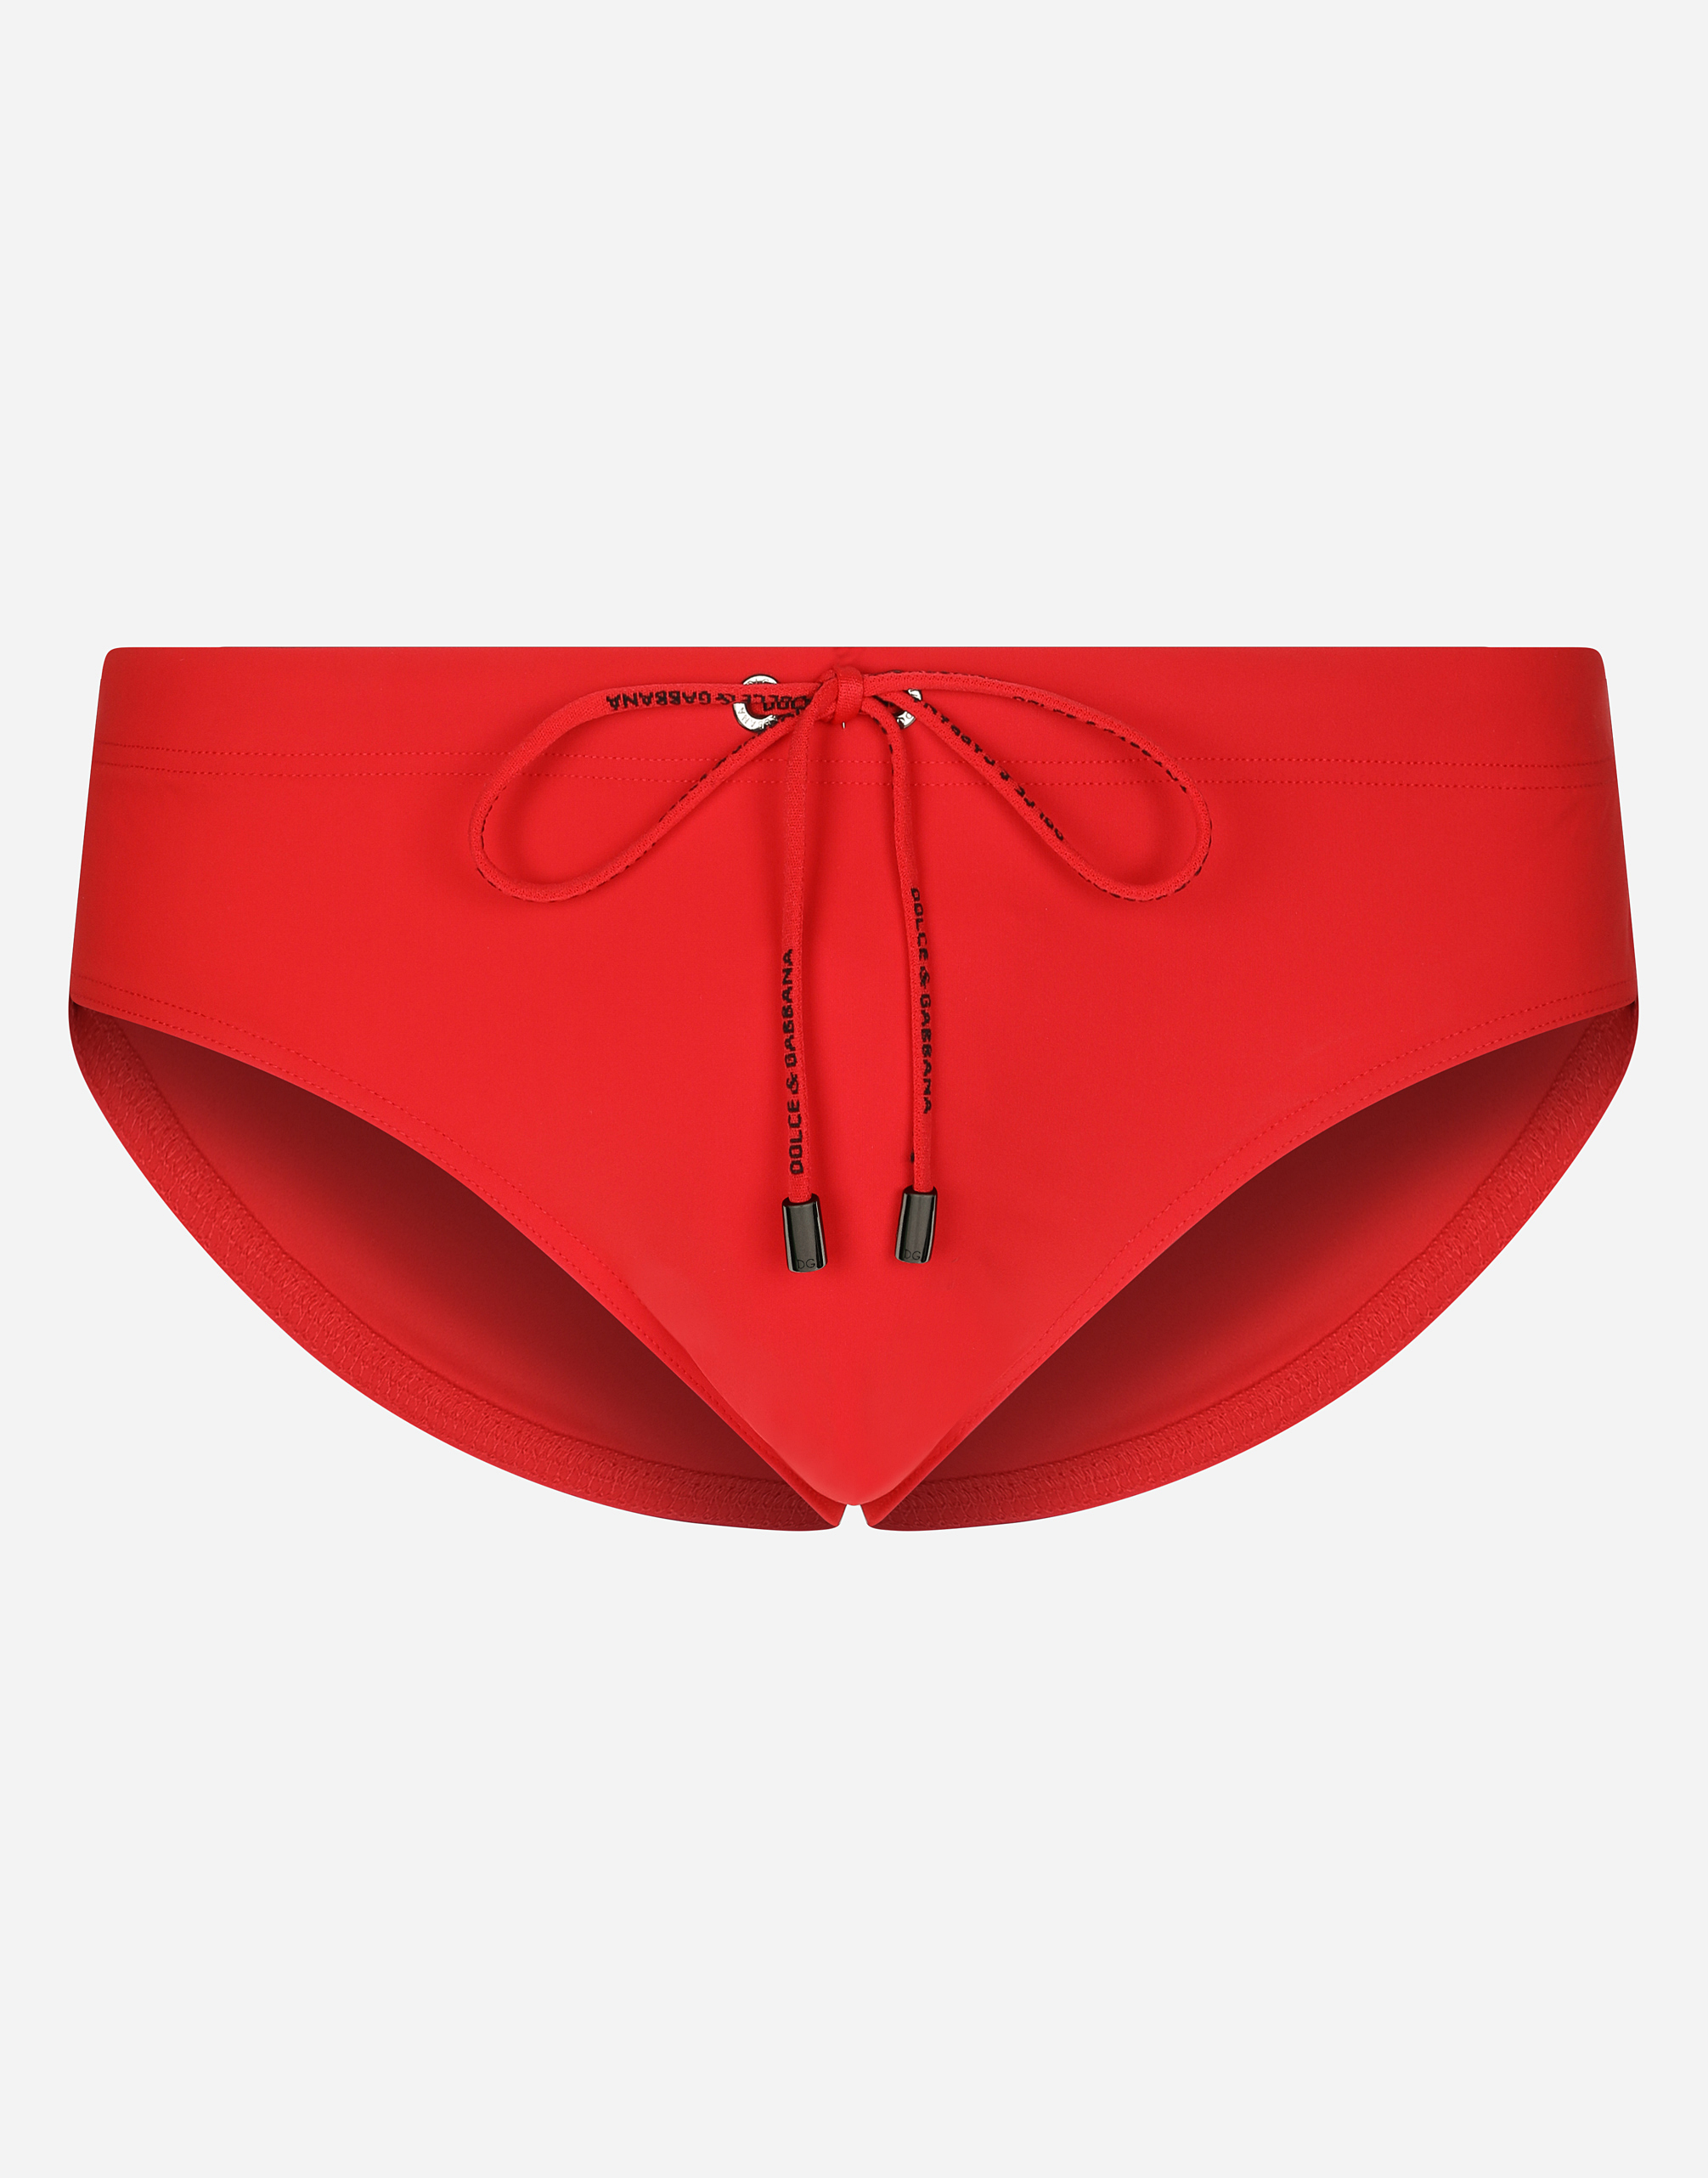 Swim briefs with high-cut leg and branded rear waistband in Red